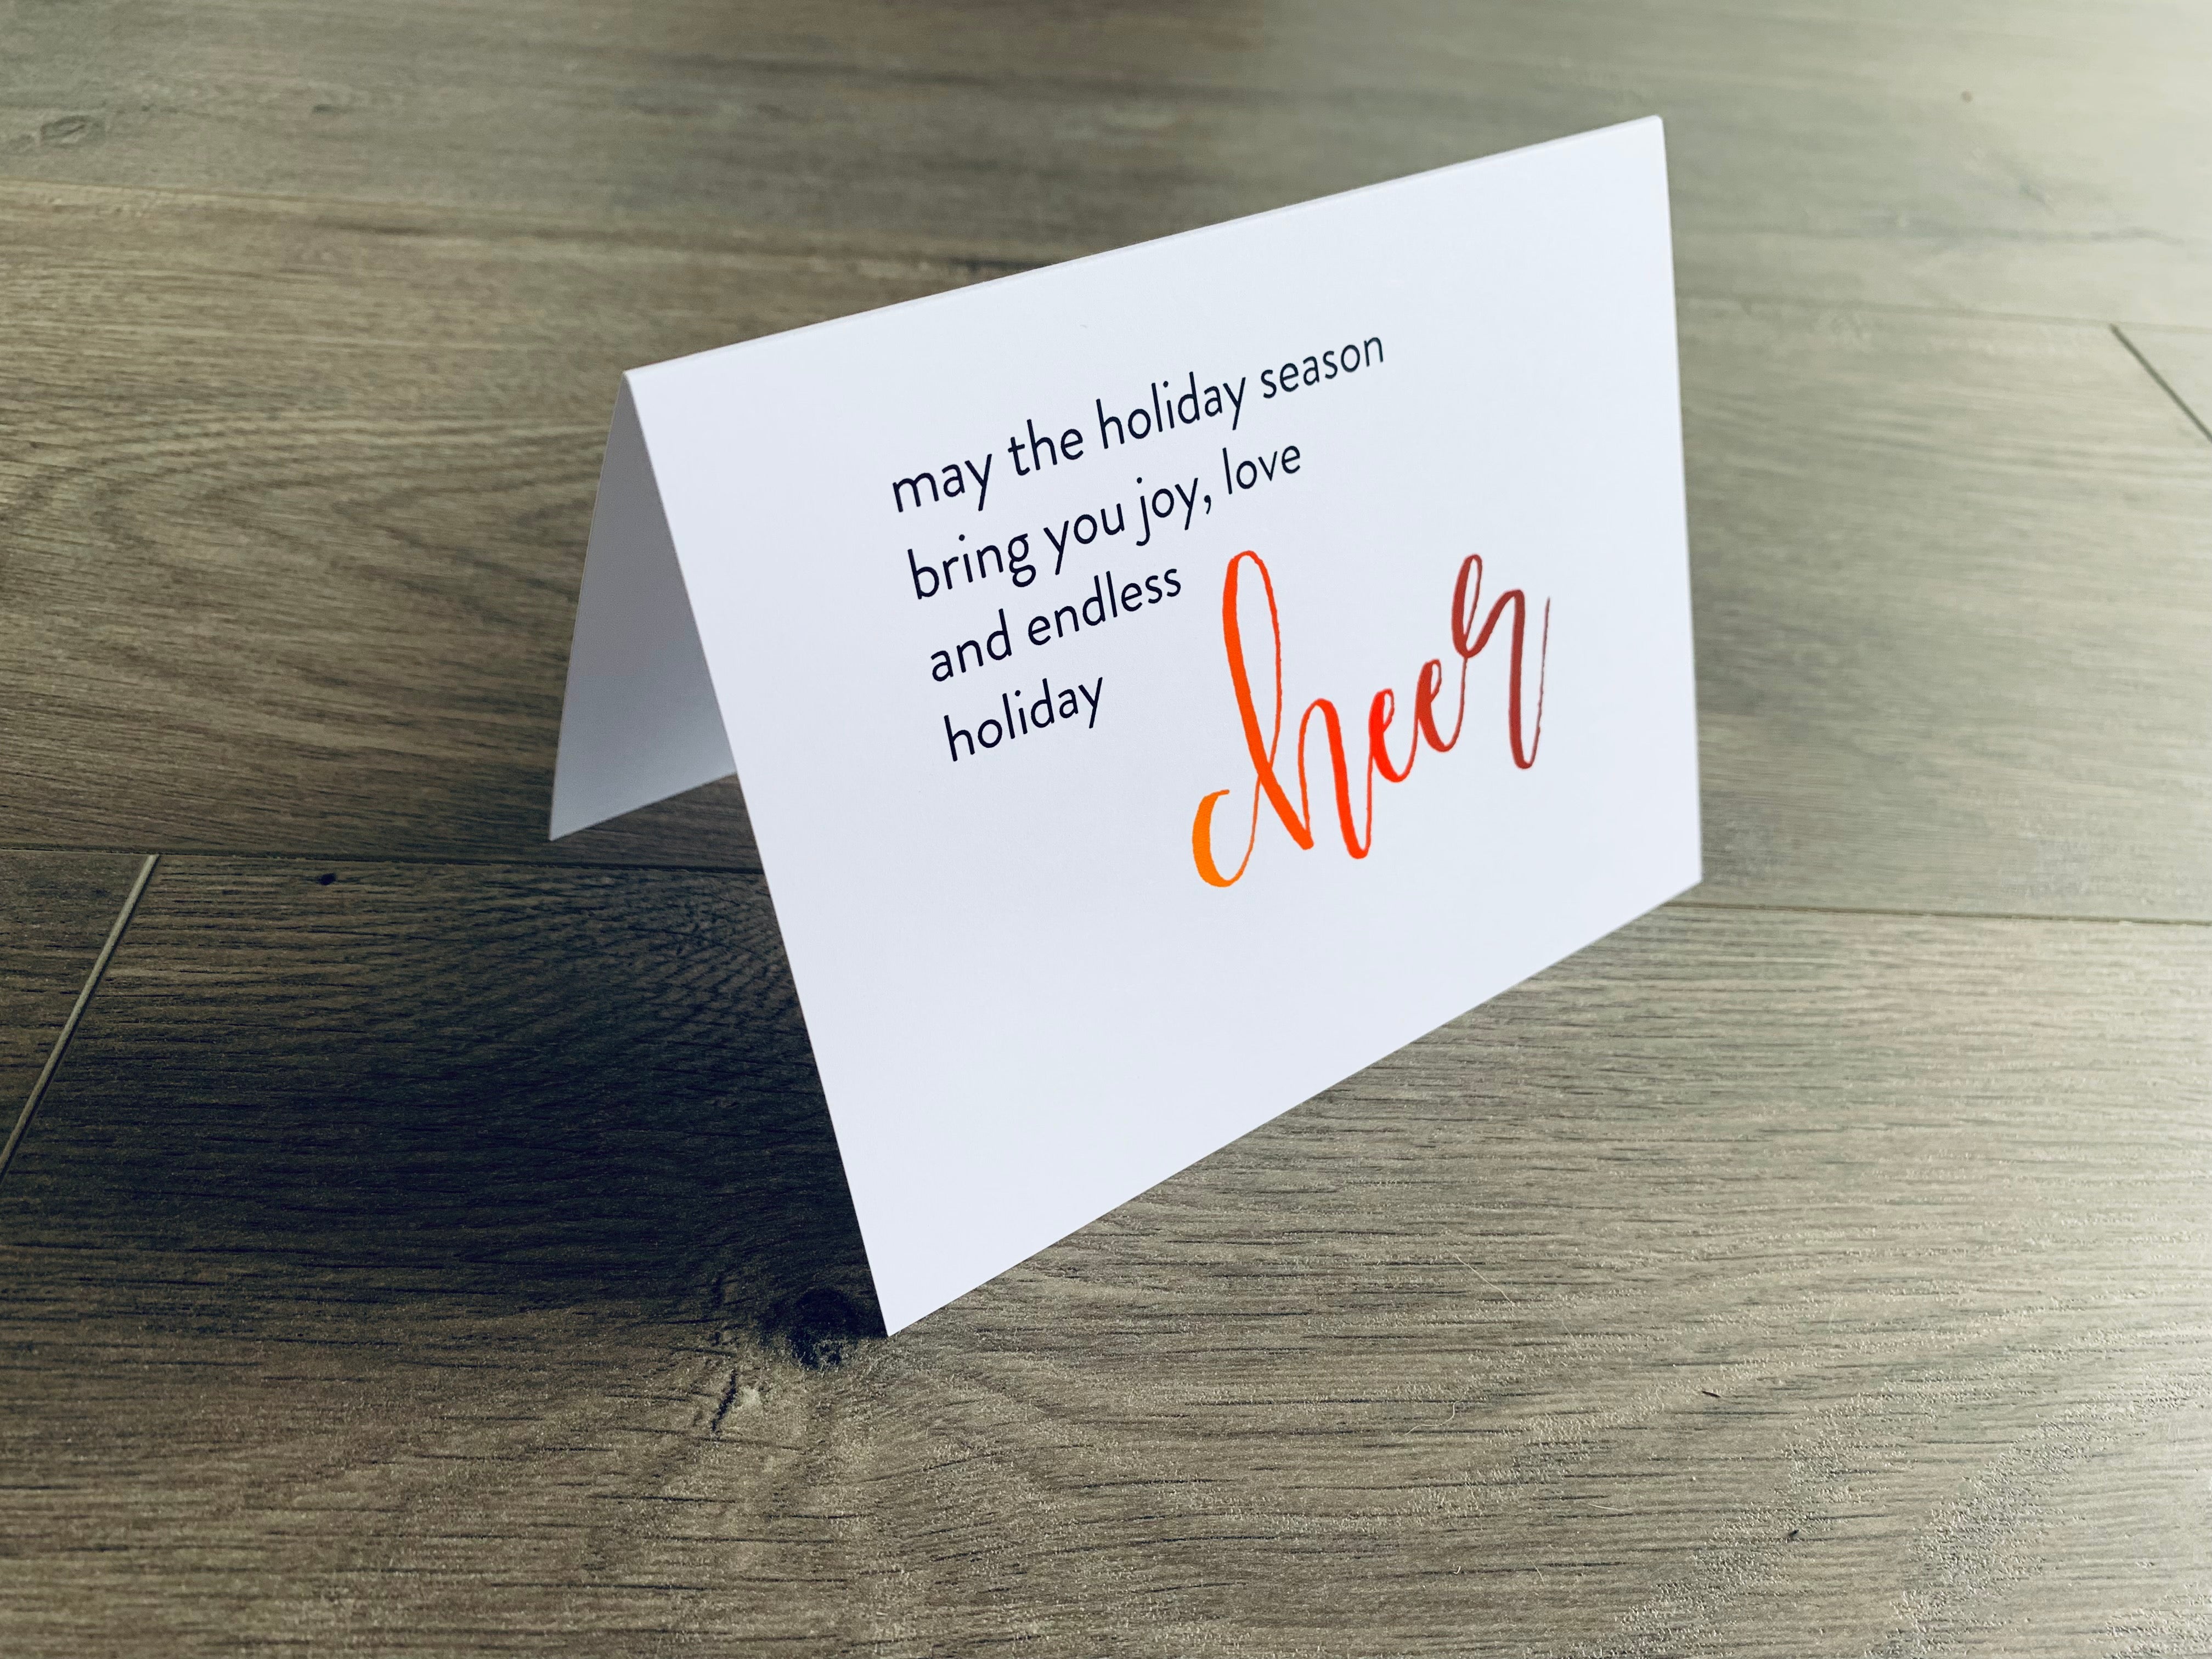 A white folded notecard is propped up on a wooden floor. The card says, "may the holiday season bring you joy, love and endless holiday cheer." From the Meaning of Christmas Collection by Stationare.